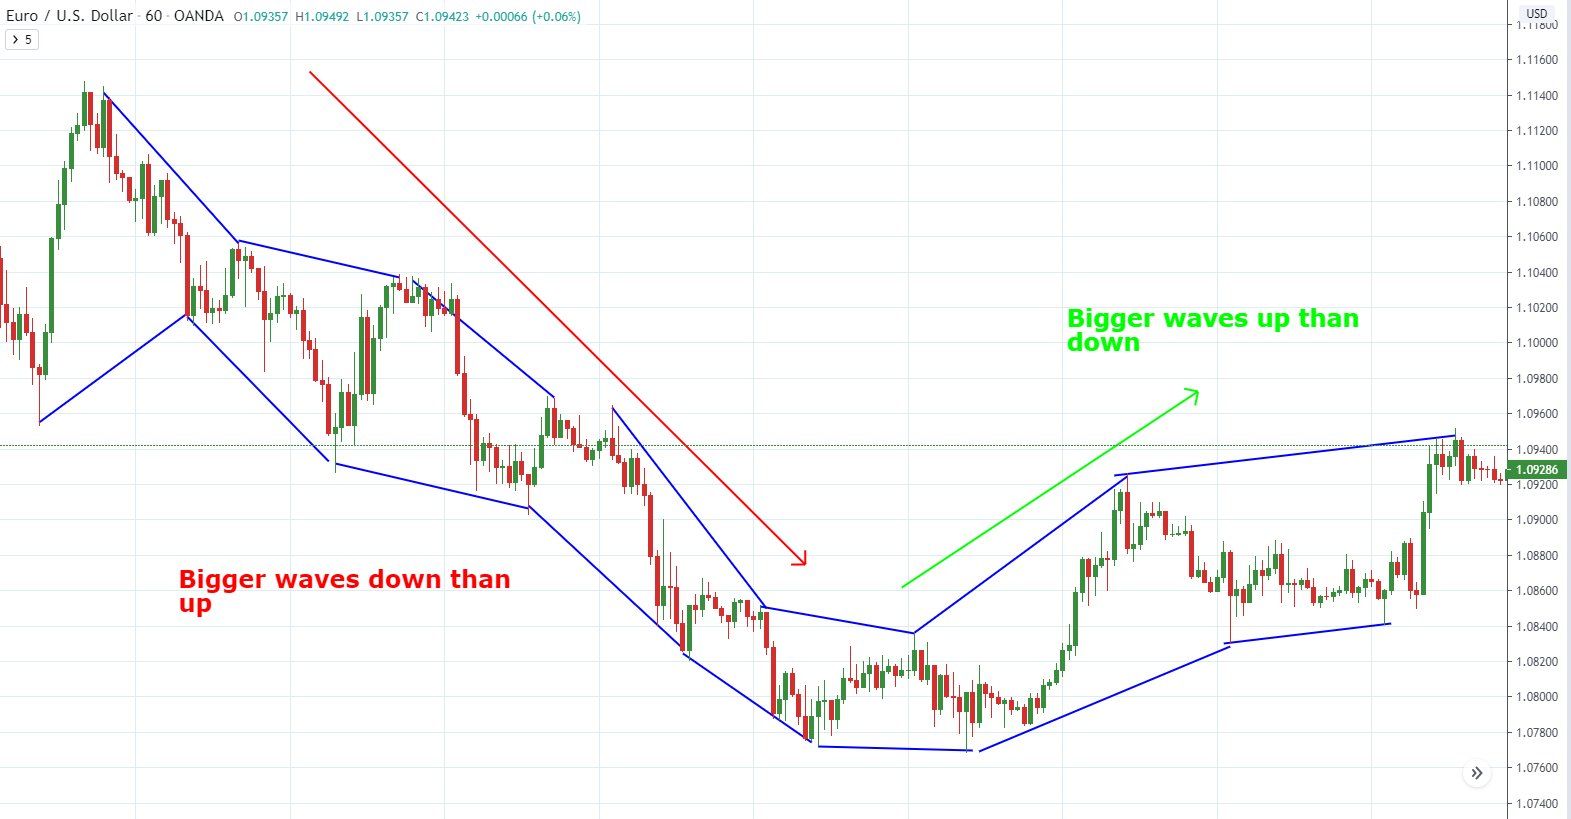 EURUSD hourly chart with price action concepts